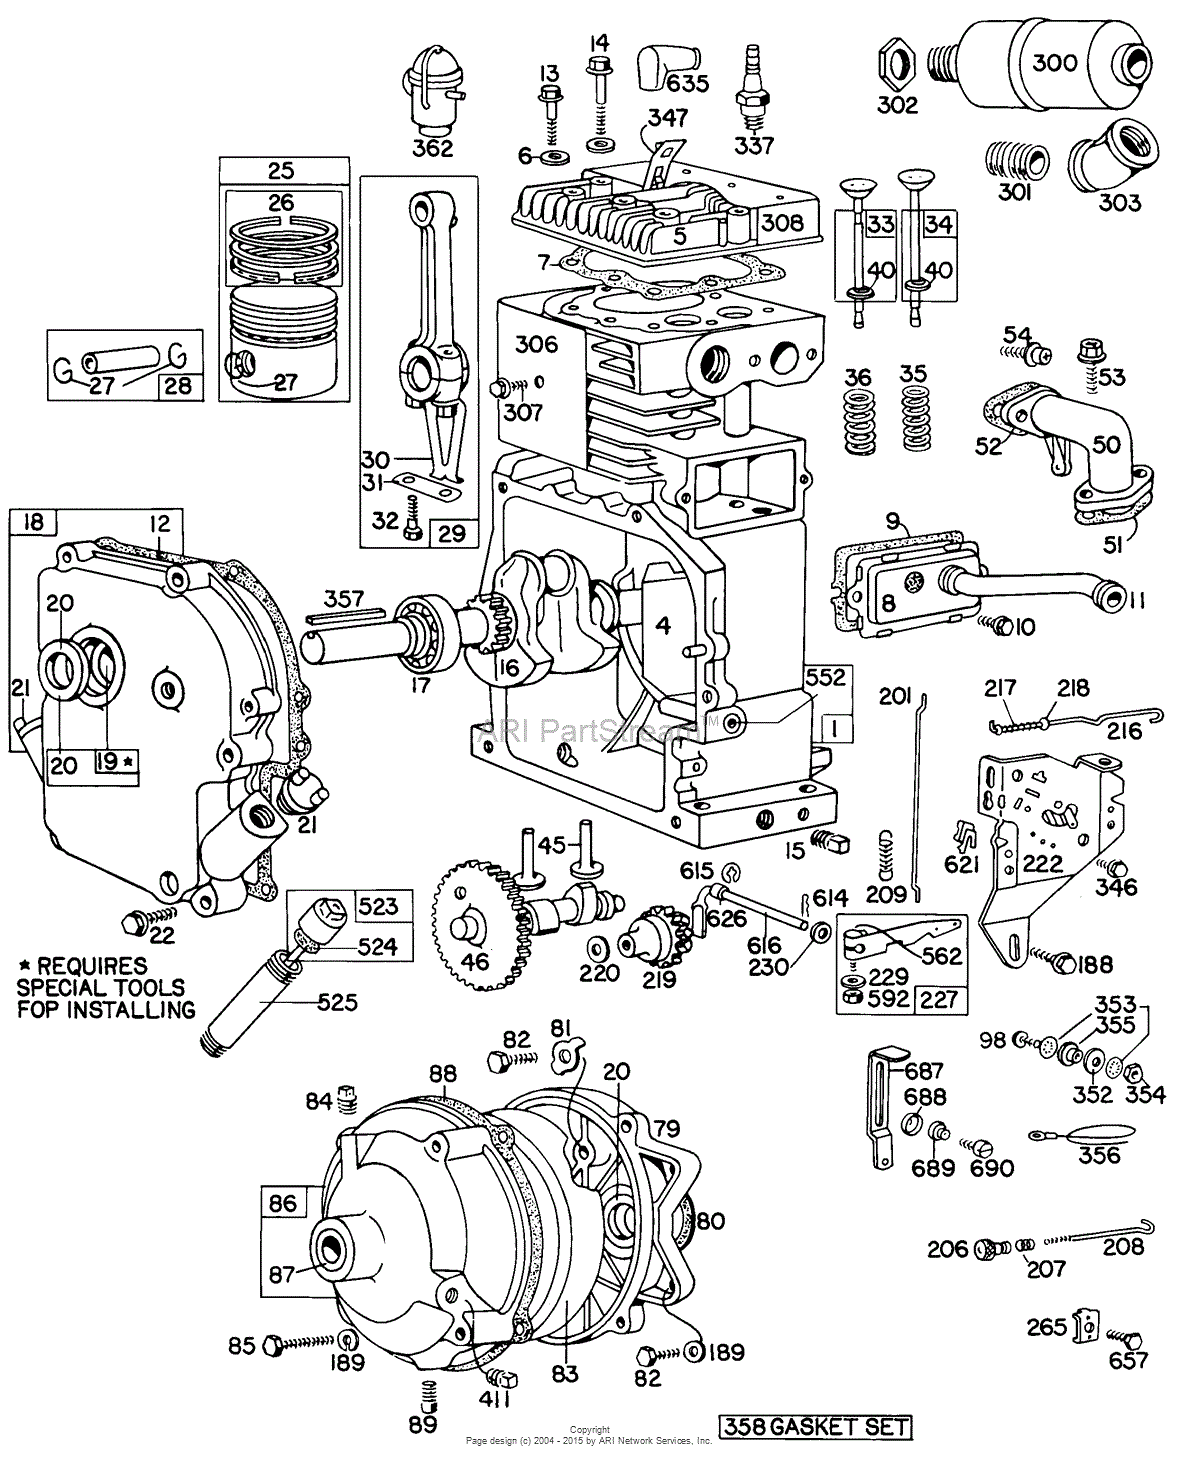 briggs and stratton 9 hp engine manual